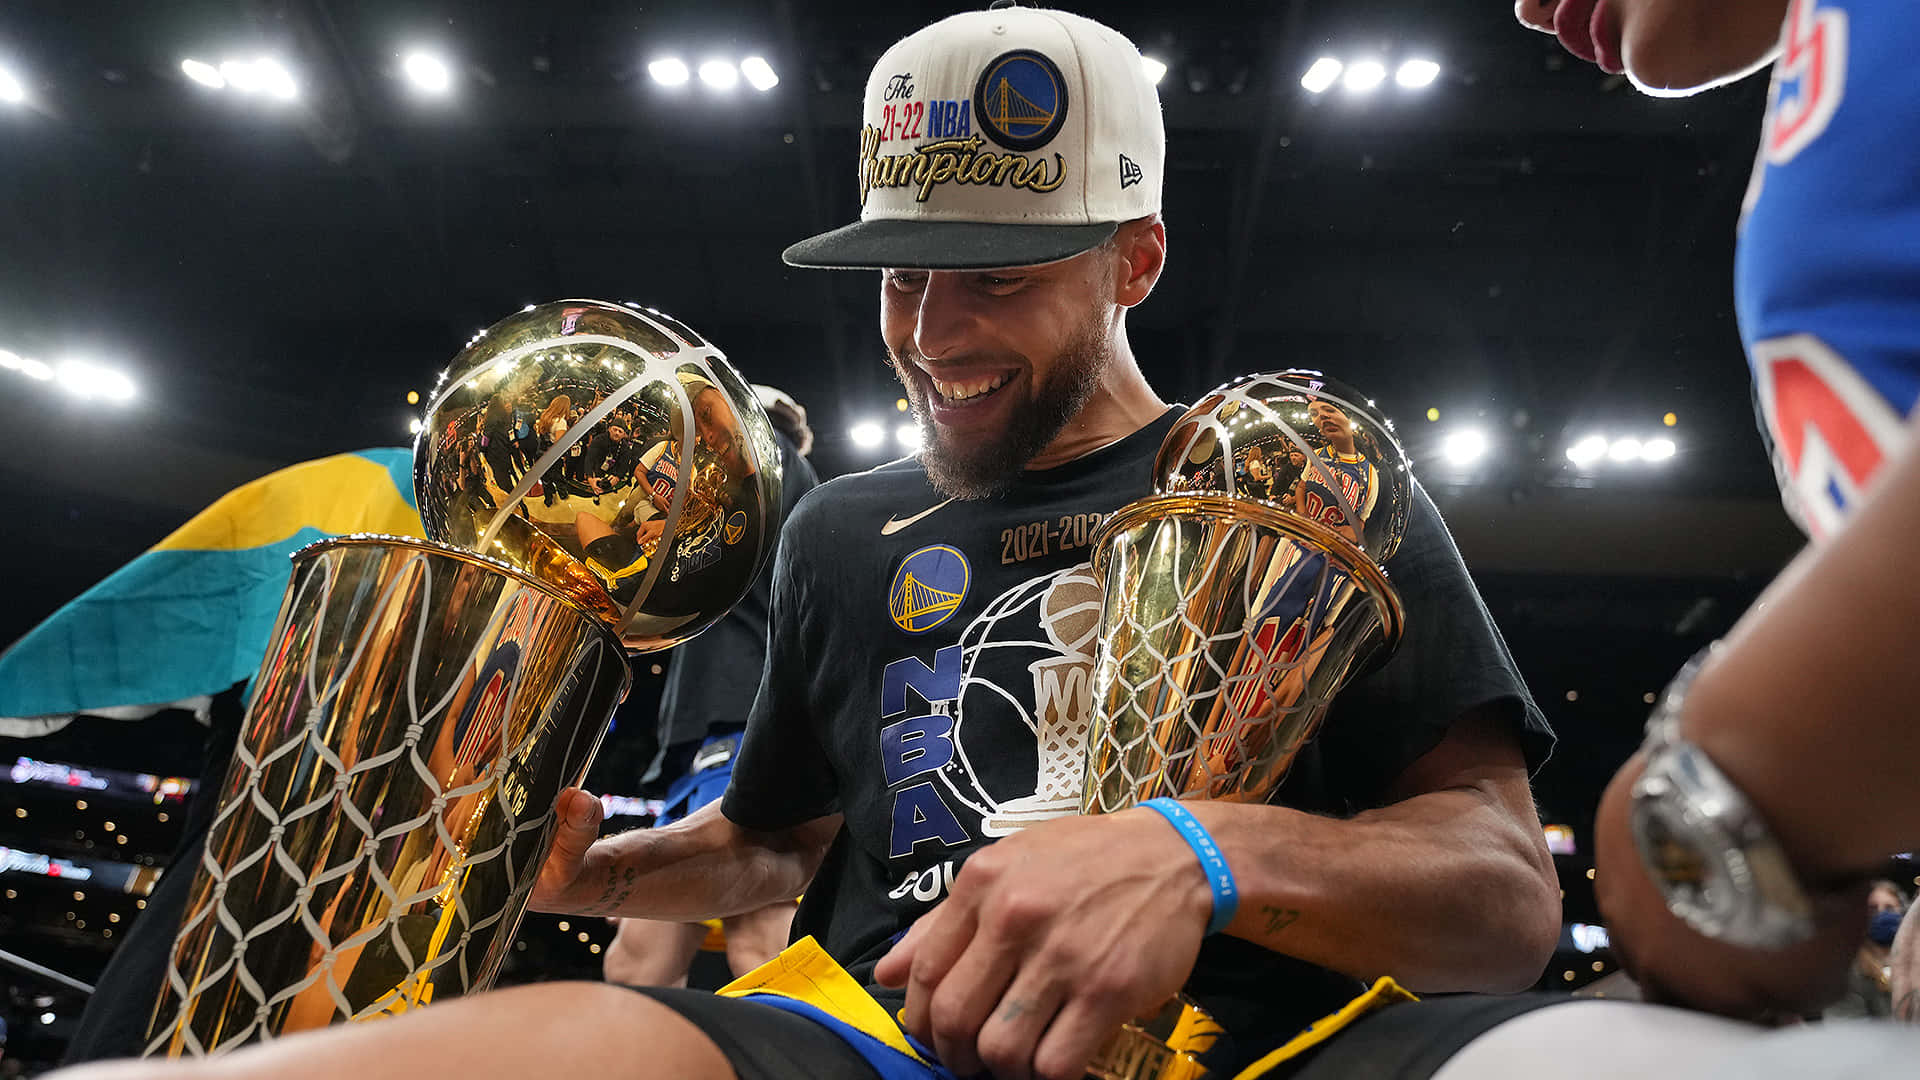 Golden State Warriors' star Stephen Curry dribbling the basketball down the court